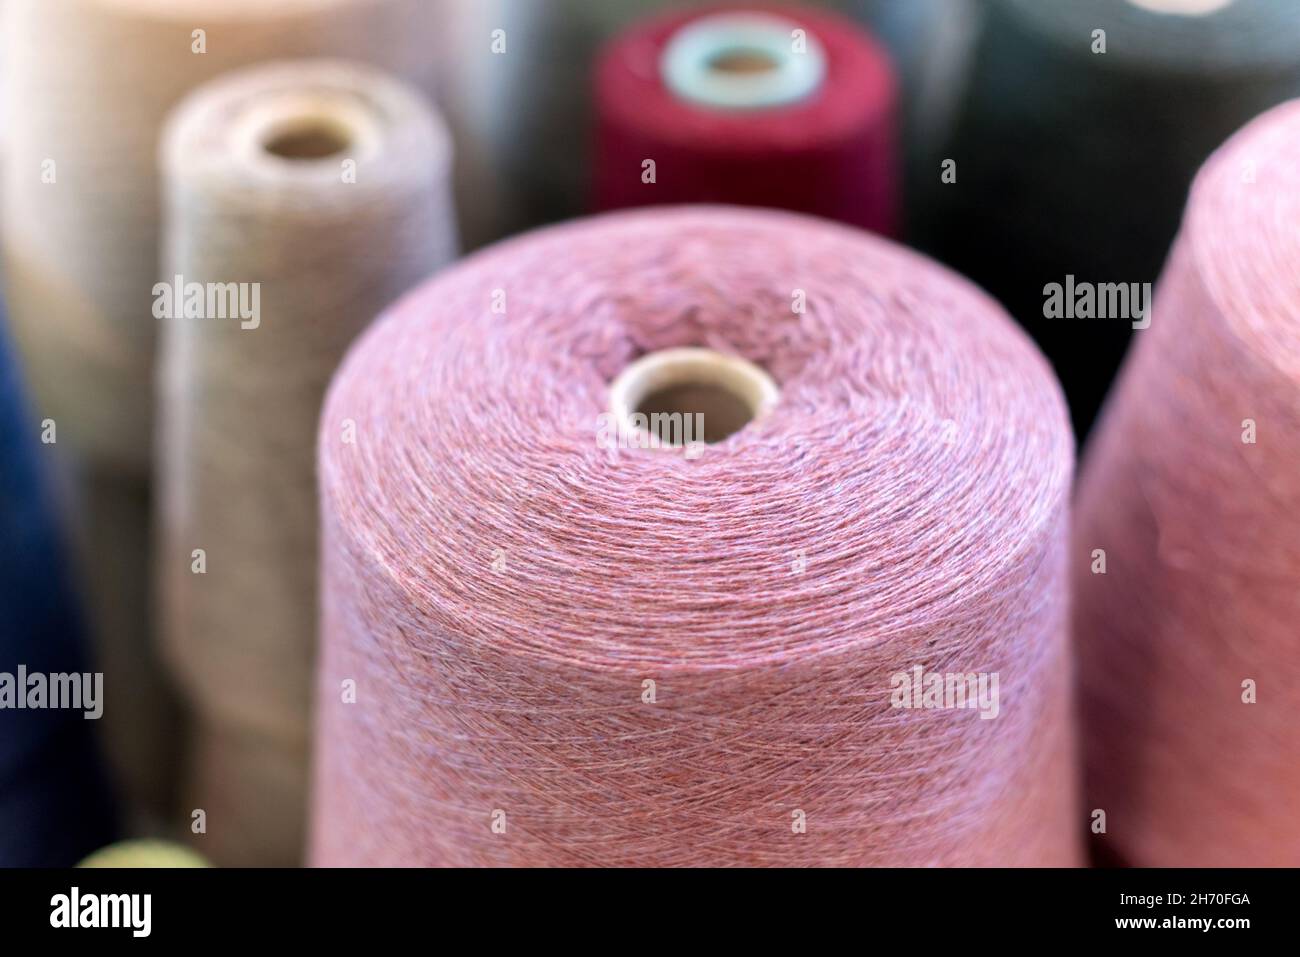 Close up view on the top of a large cone or reel of natural pink cashmere wool in a knitwear factory with copyspace Stock Photo